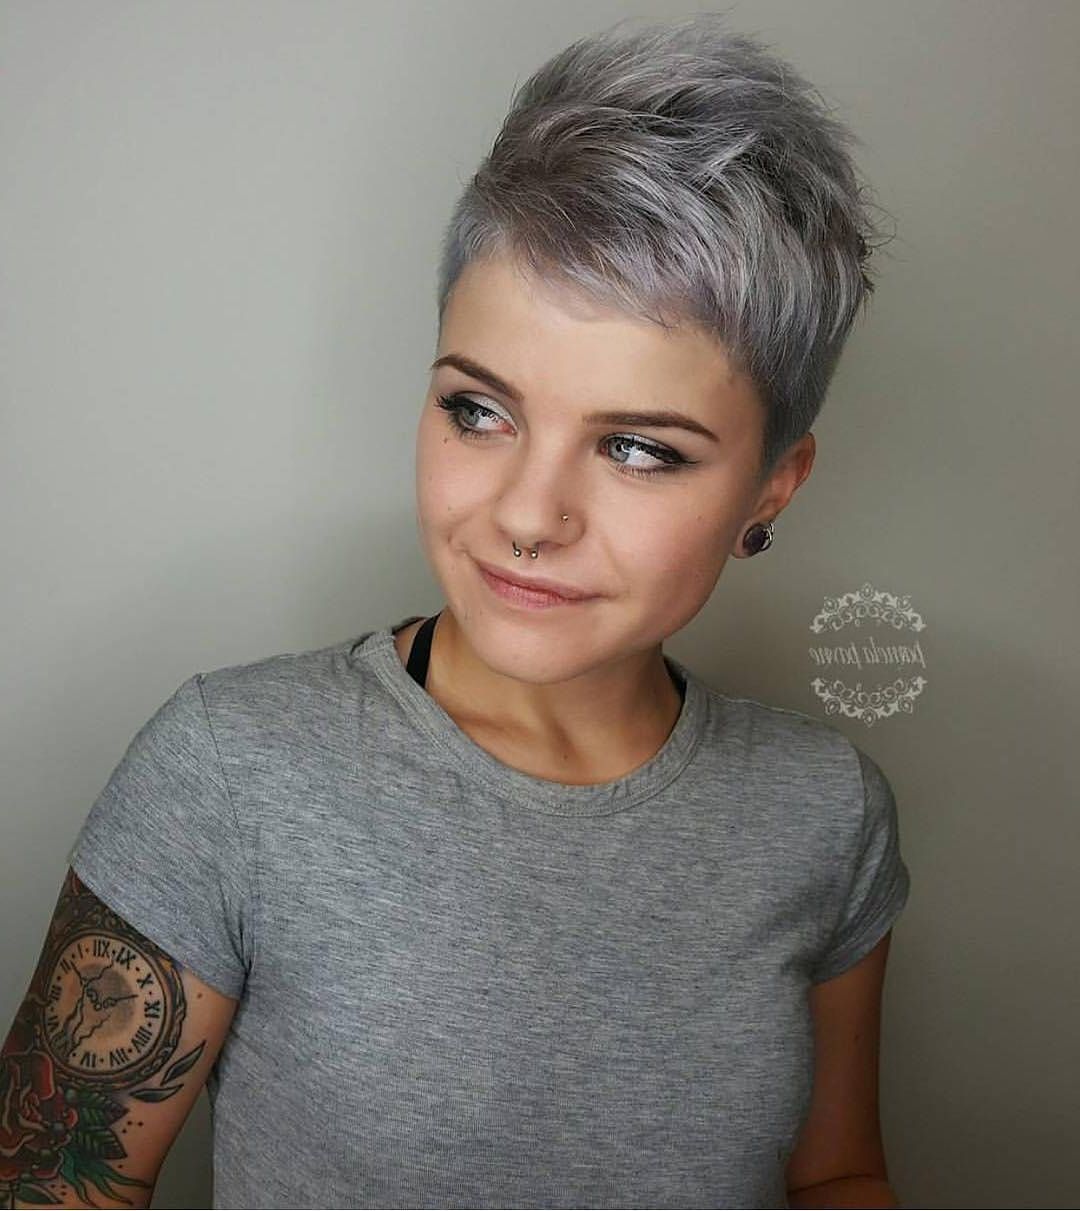 Partially Shaved Pixie Cut With Gray Coloring | Pixie Cuts In 2018 Pertaining To Voluminous Gray Pixie Haircuts (View 4 of 20)